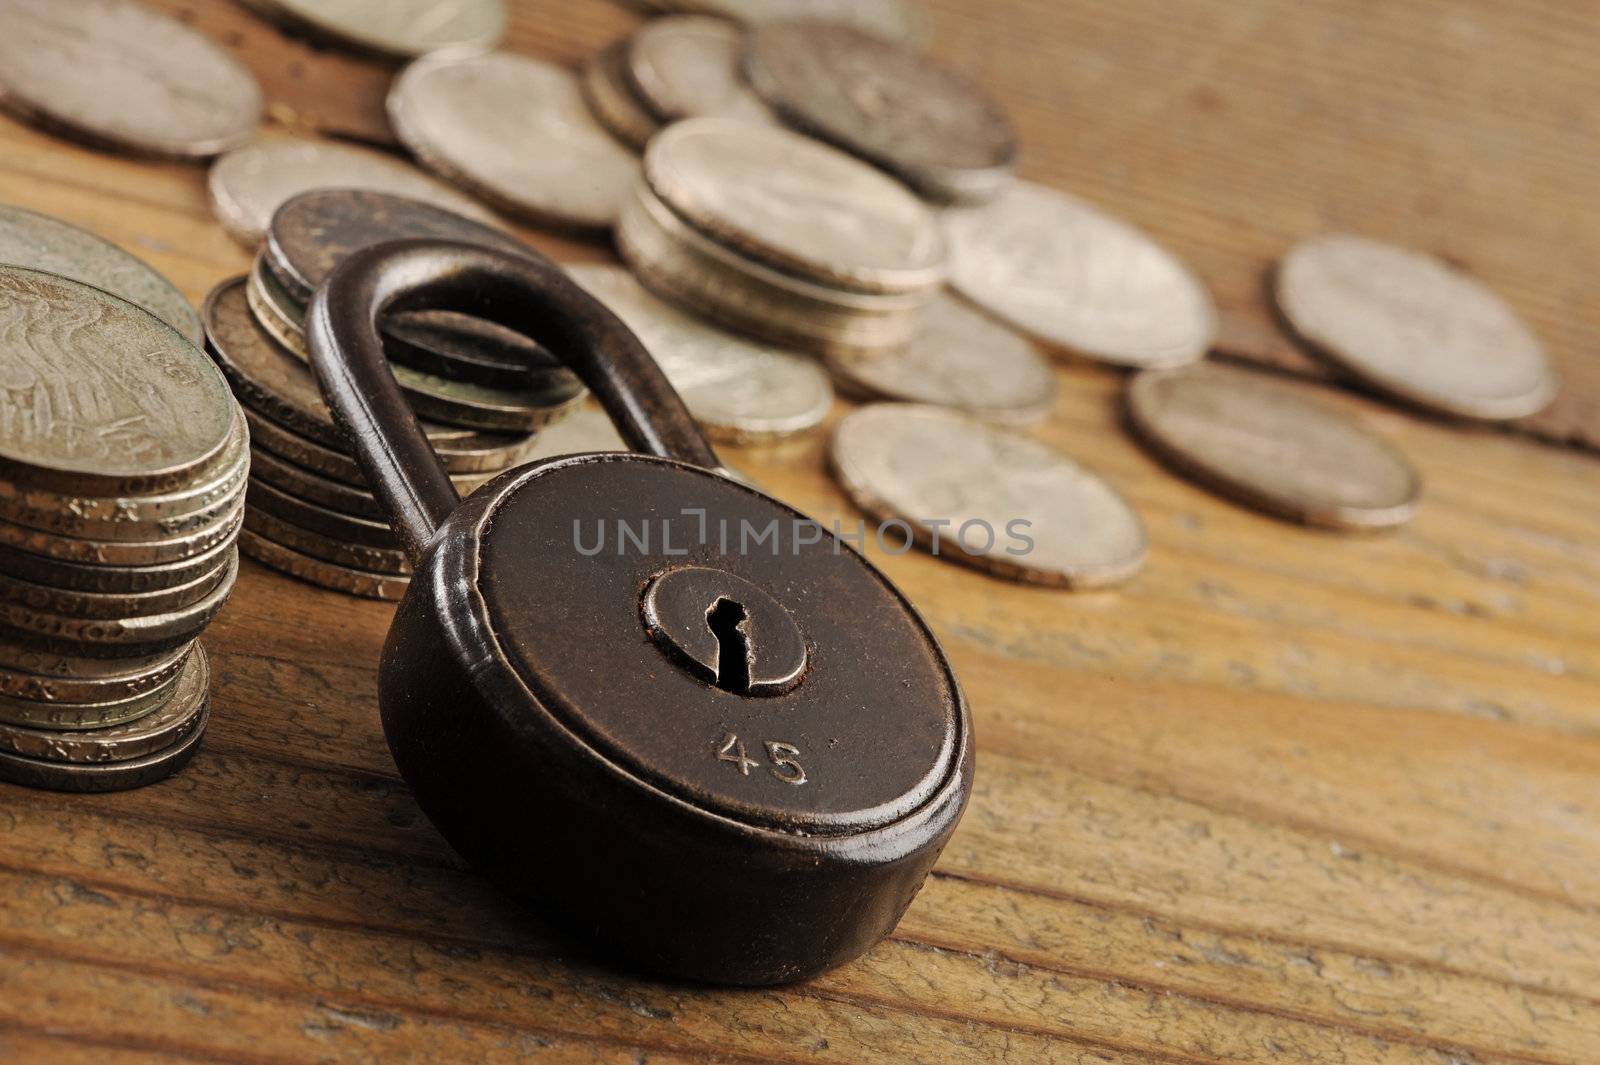 Old padlock close-up.coins on background